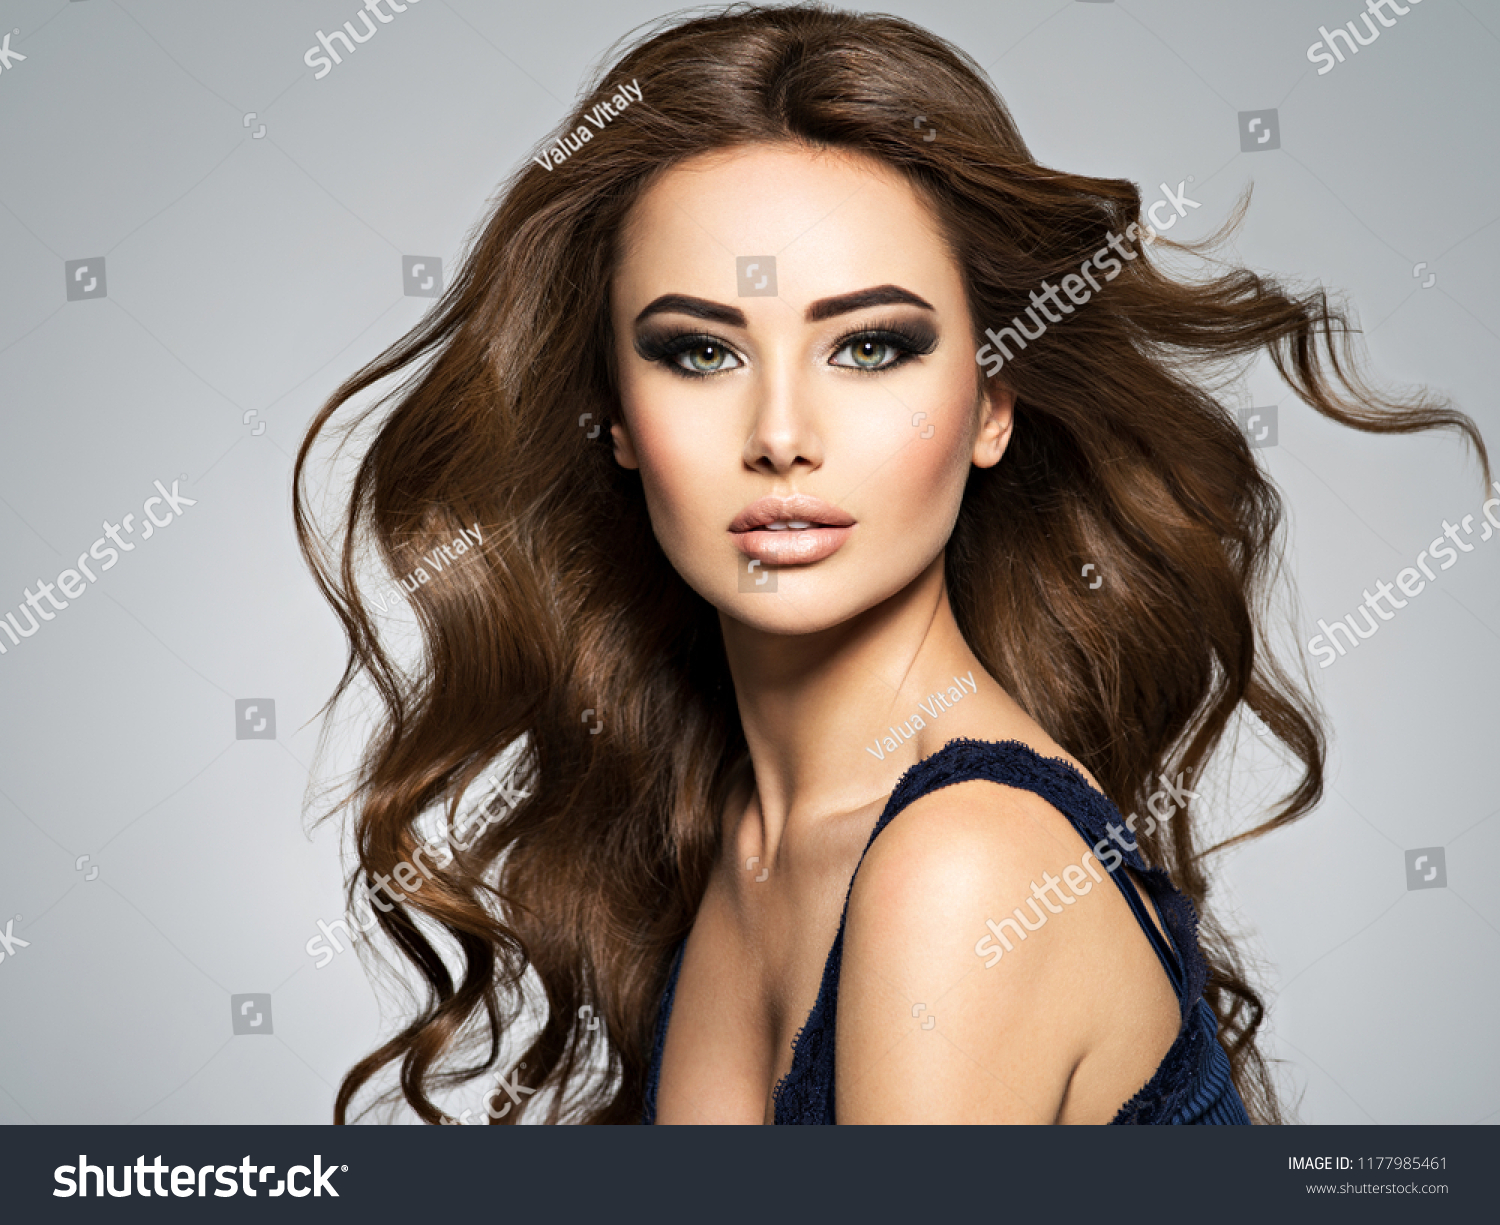 Beautiful caucasian woman with long brown curly hair. Portrait of a pretty young adult girl. Sexy face of an attractive  lady posing at studio over grey background. #1177985461